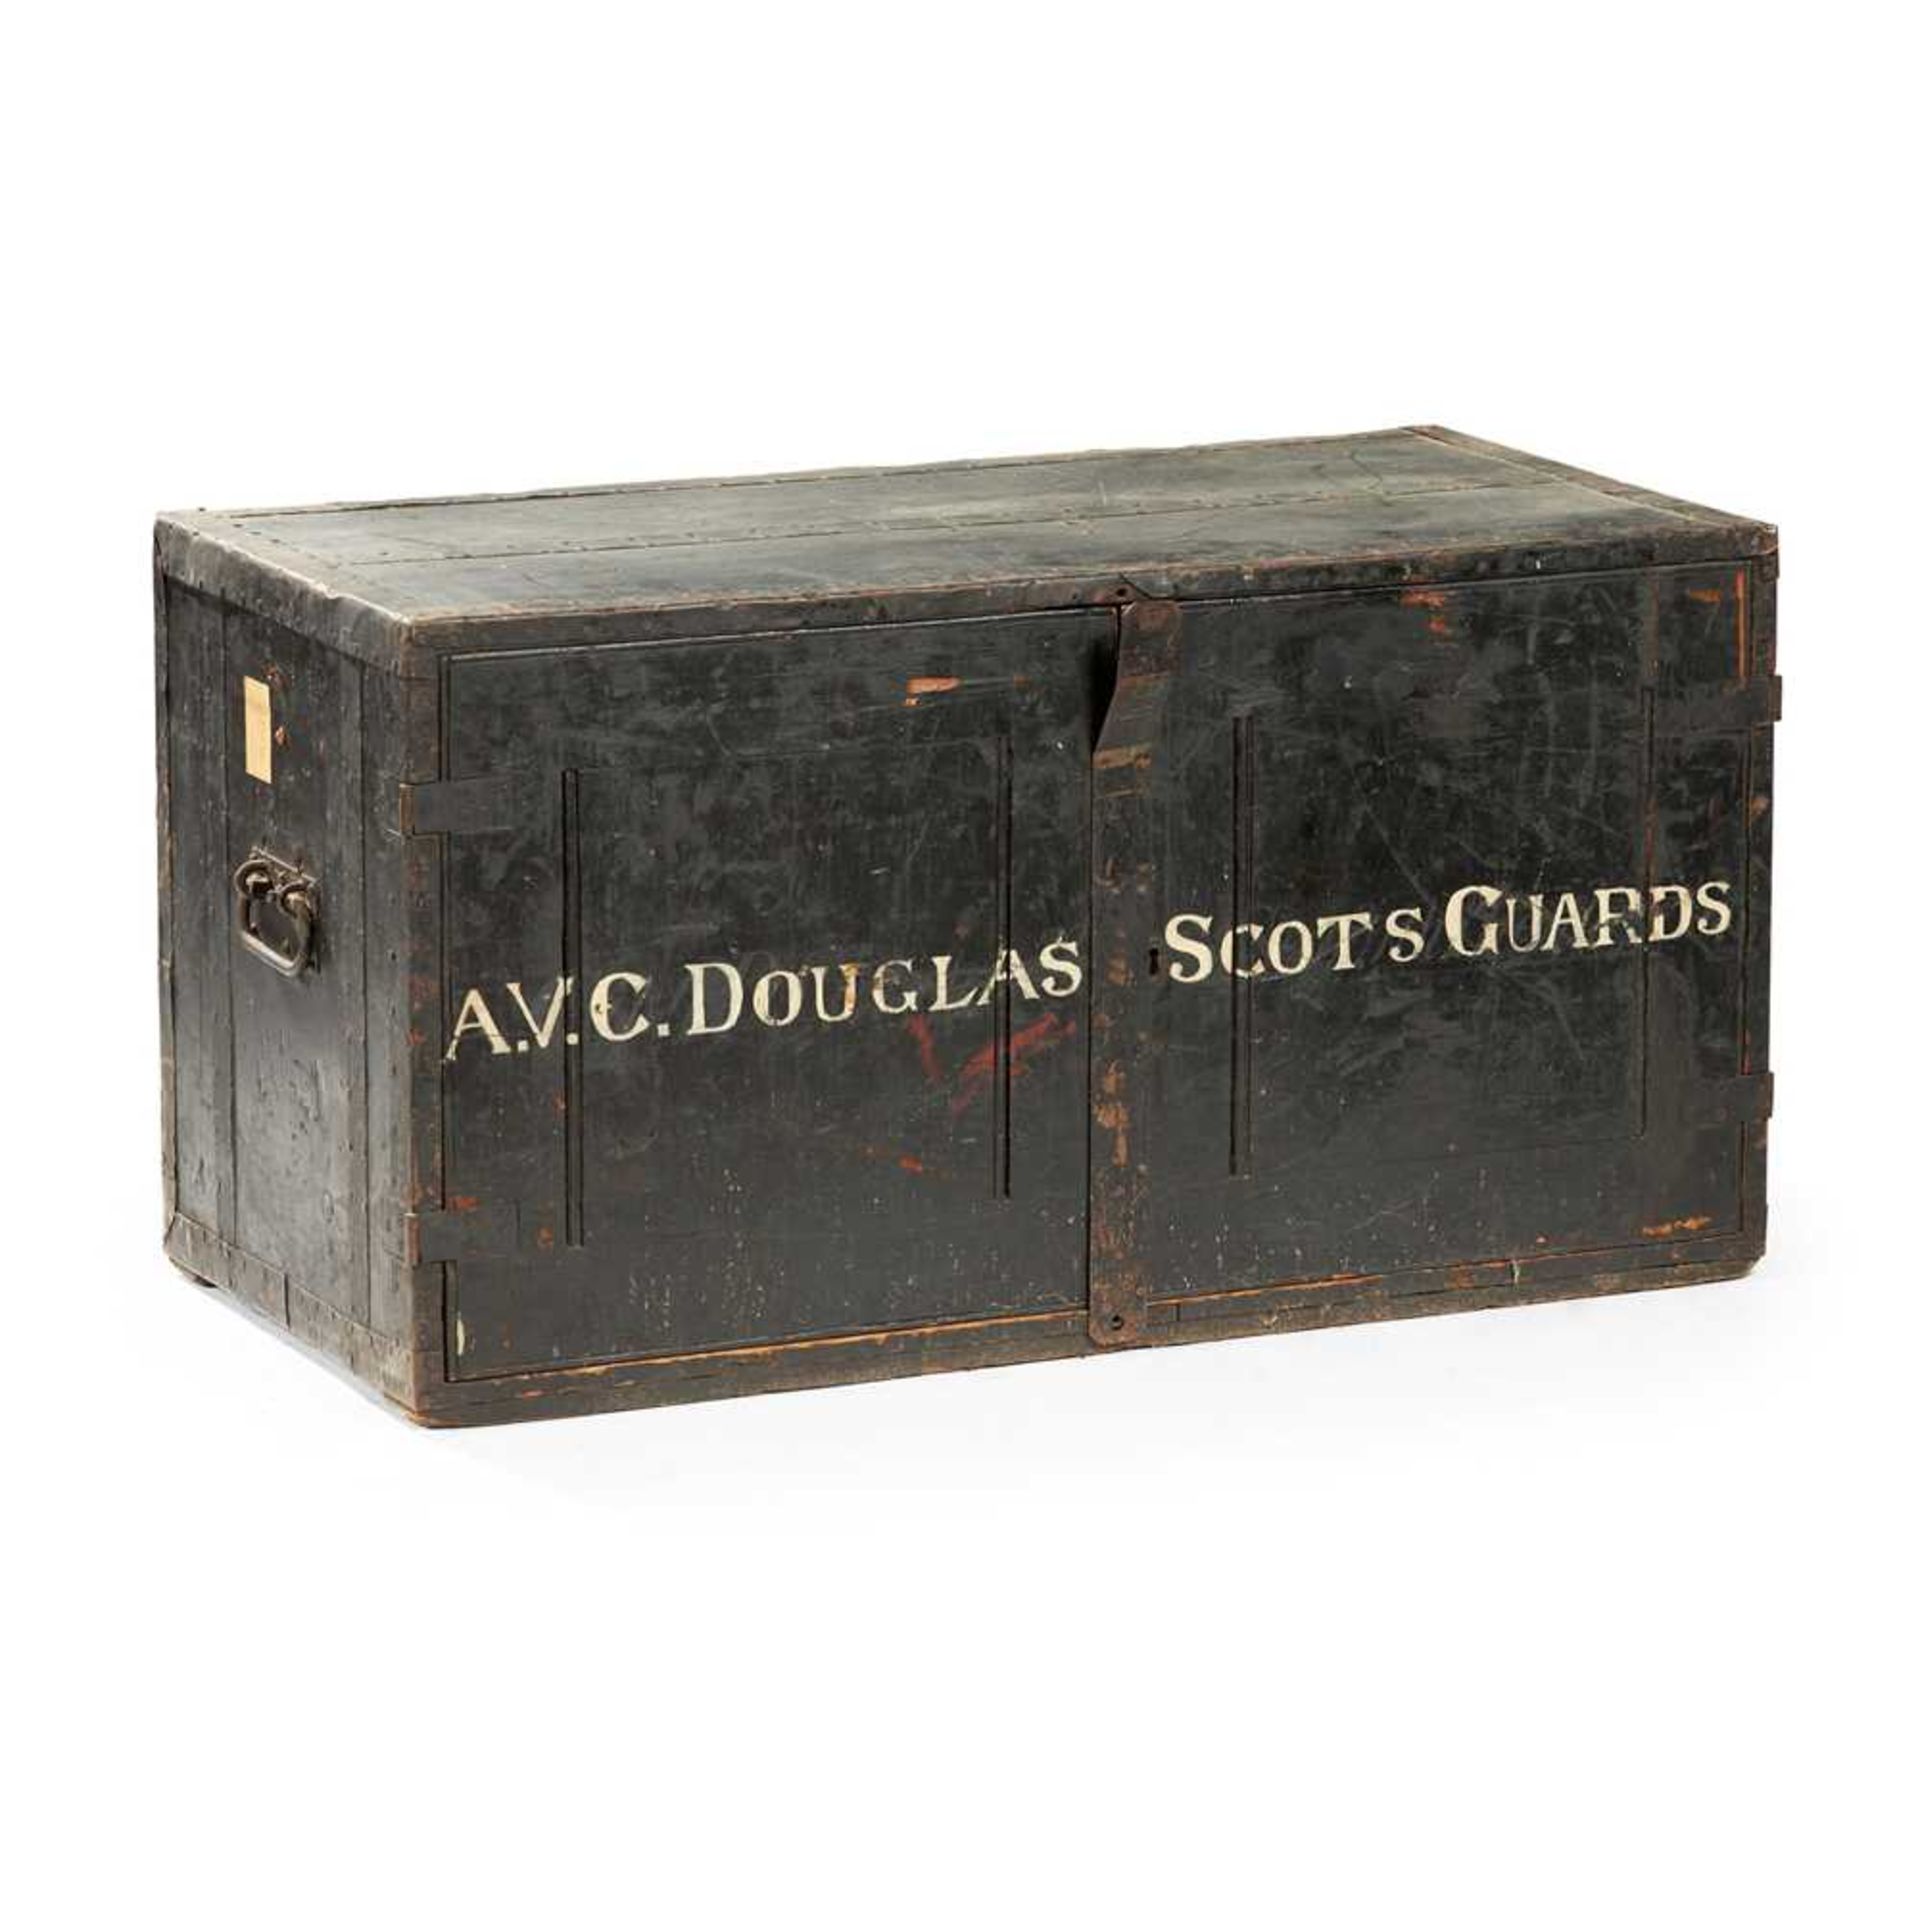 PAINTED AND METAL BOUND CAMPAIGN CUPBOARD, OF SCOTS GUARDS INTEREST LATE19TH/EARLY 20TH CENTURY